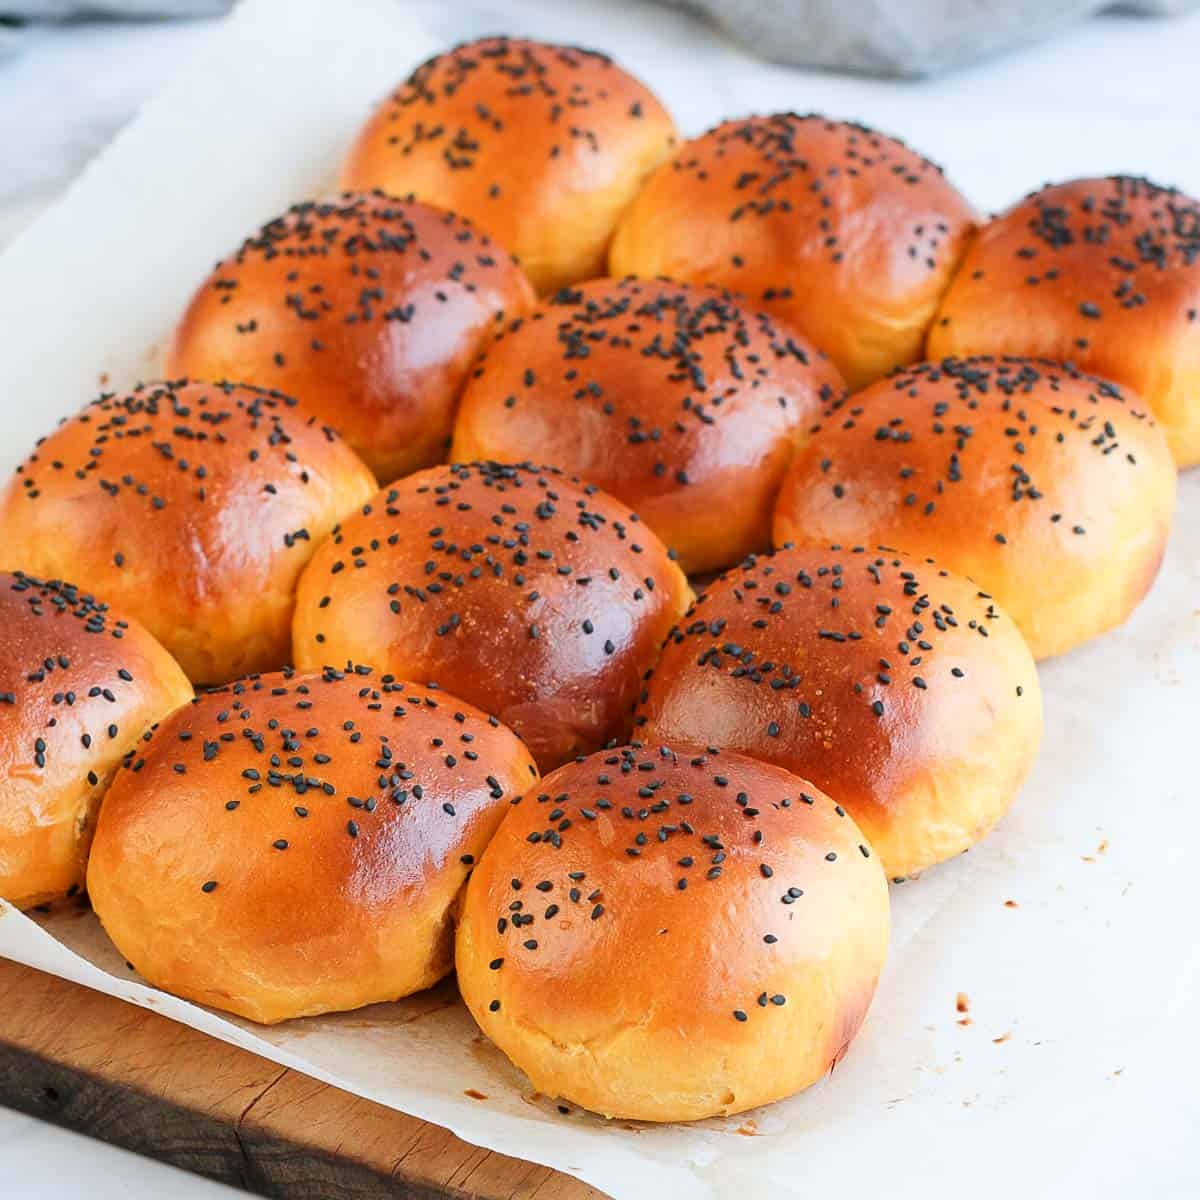 Buns on a sheet of baking paper over a wooden cutting board.